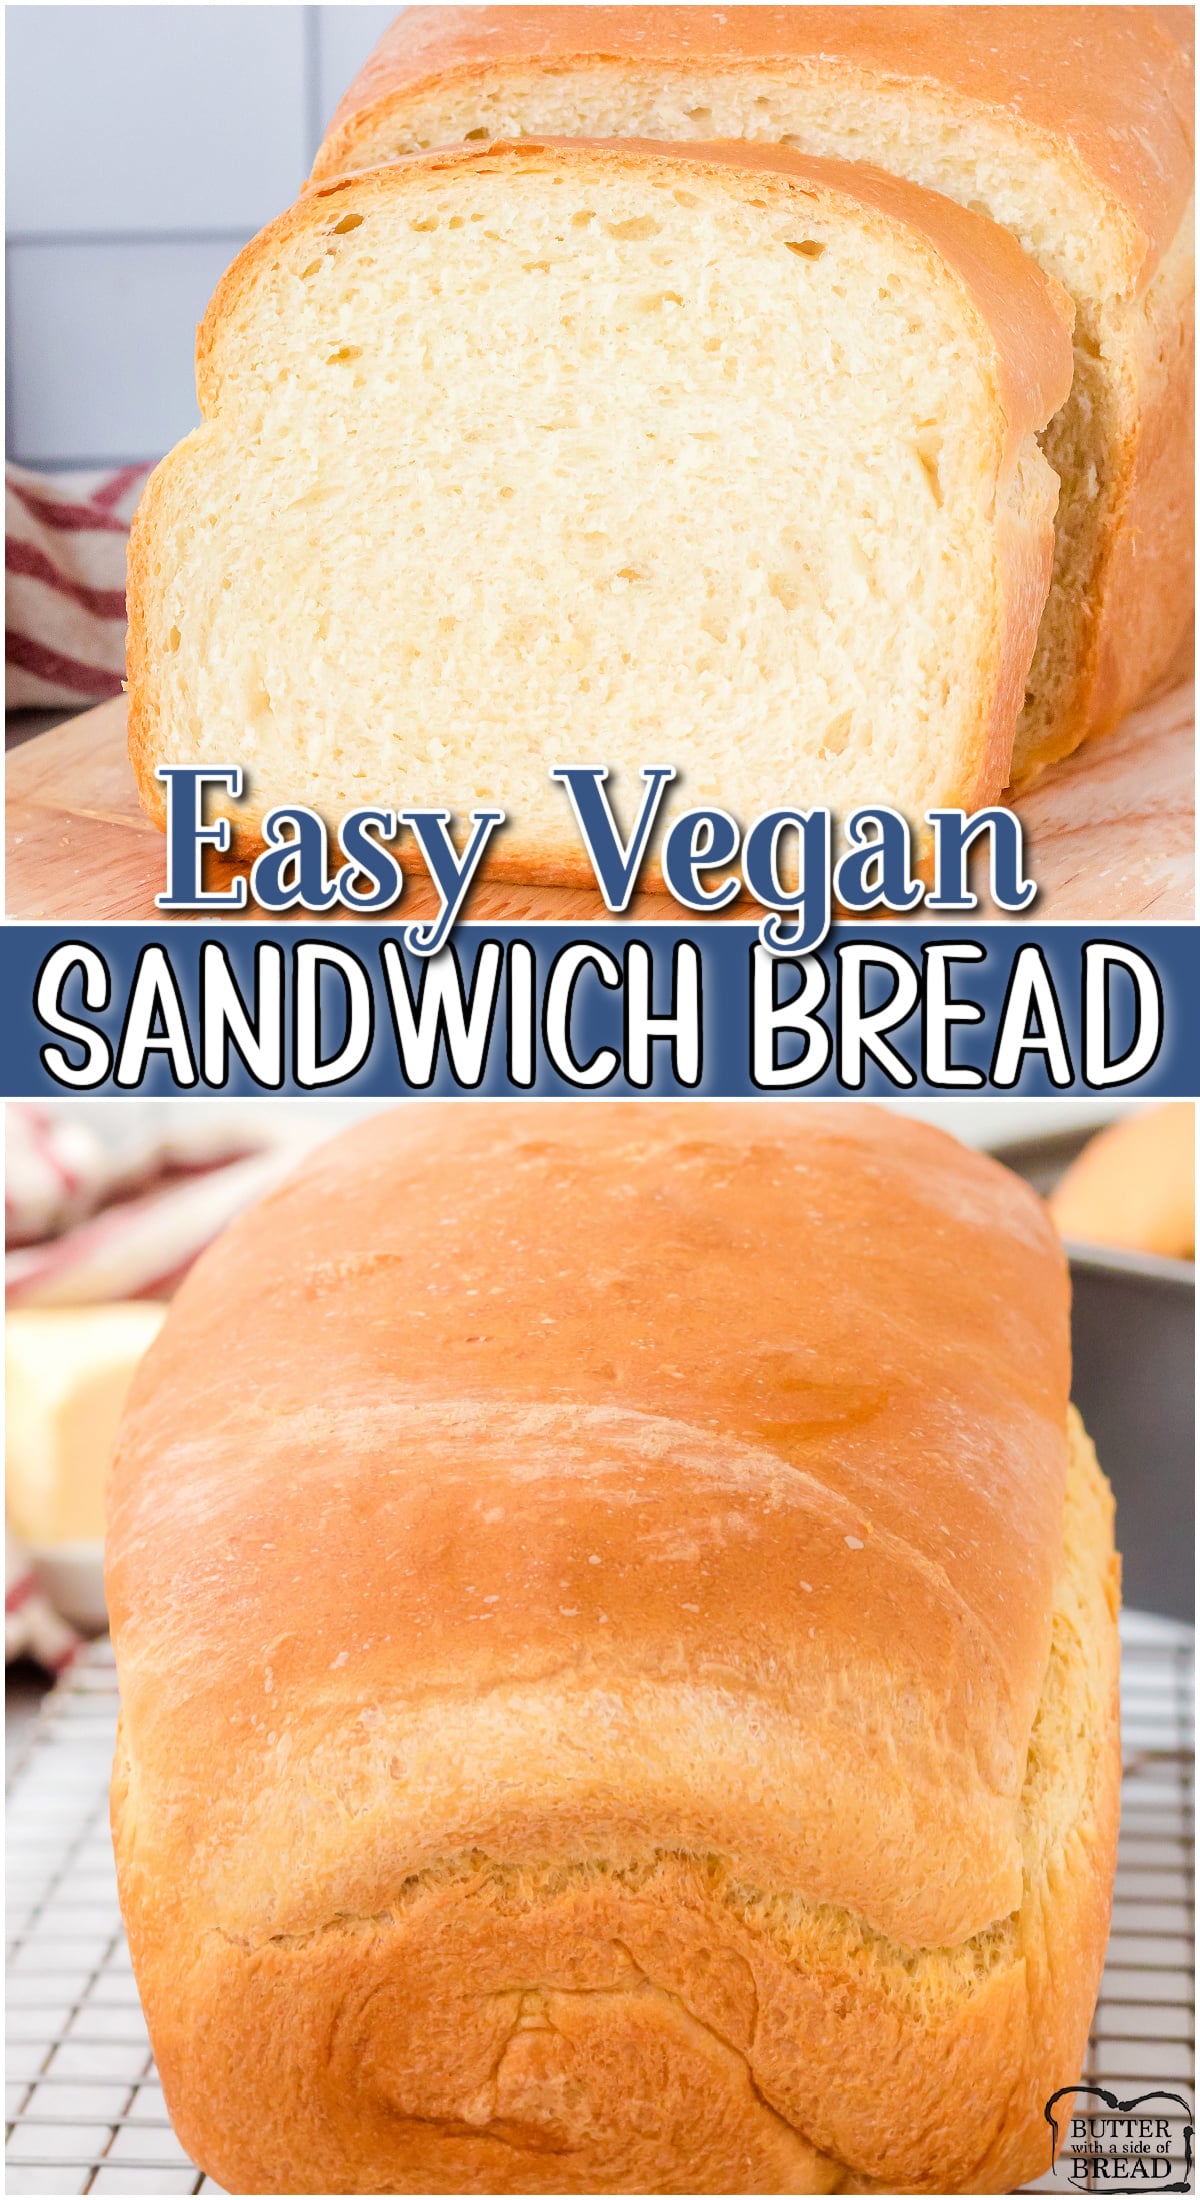 Delicious, buttery Homemade Vegan Bread perfect for sandwiches & is so easy to make! This recipe makes 2 loaves of soft and fluffy white sandwich bread.